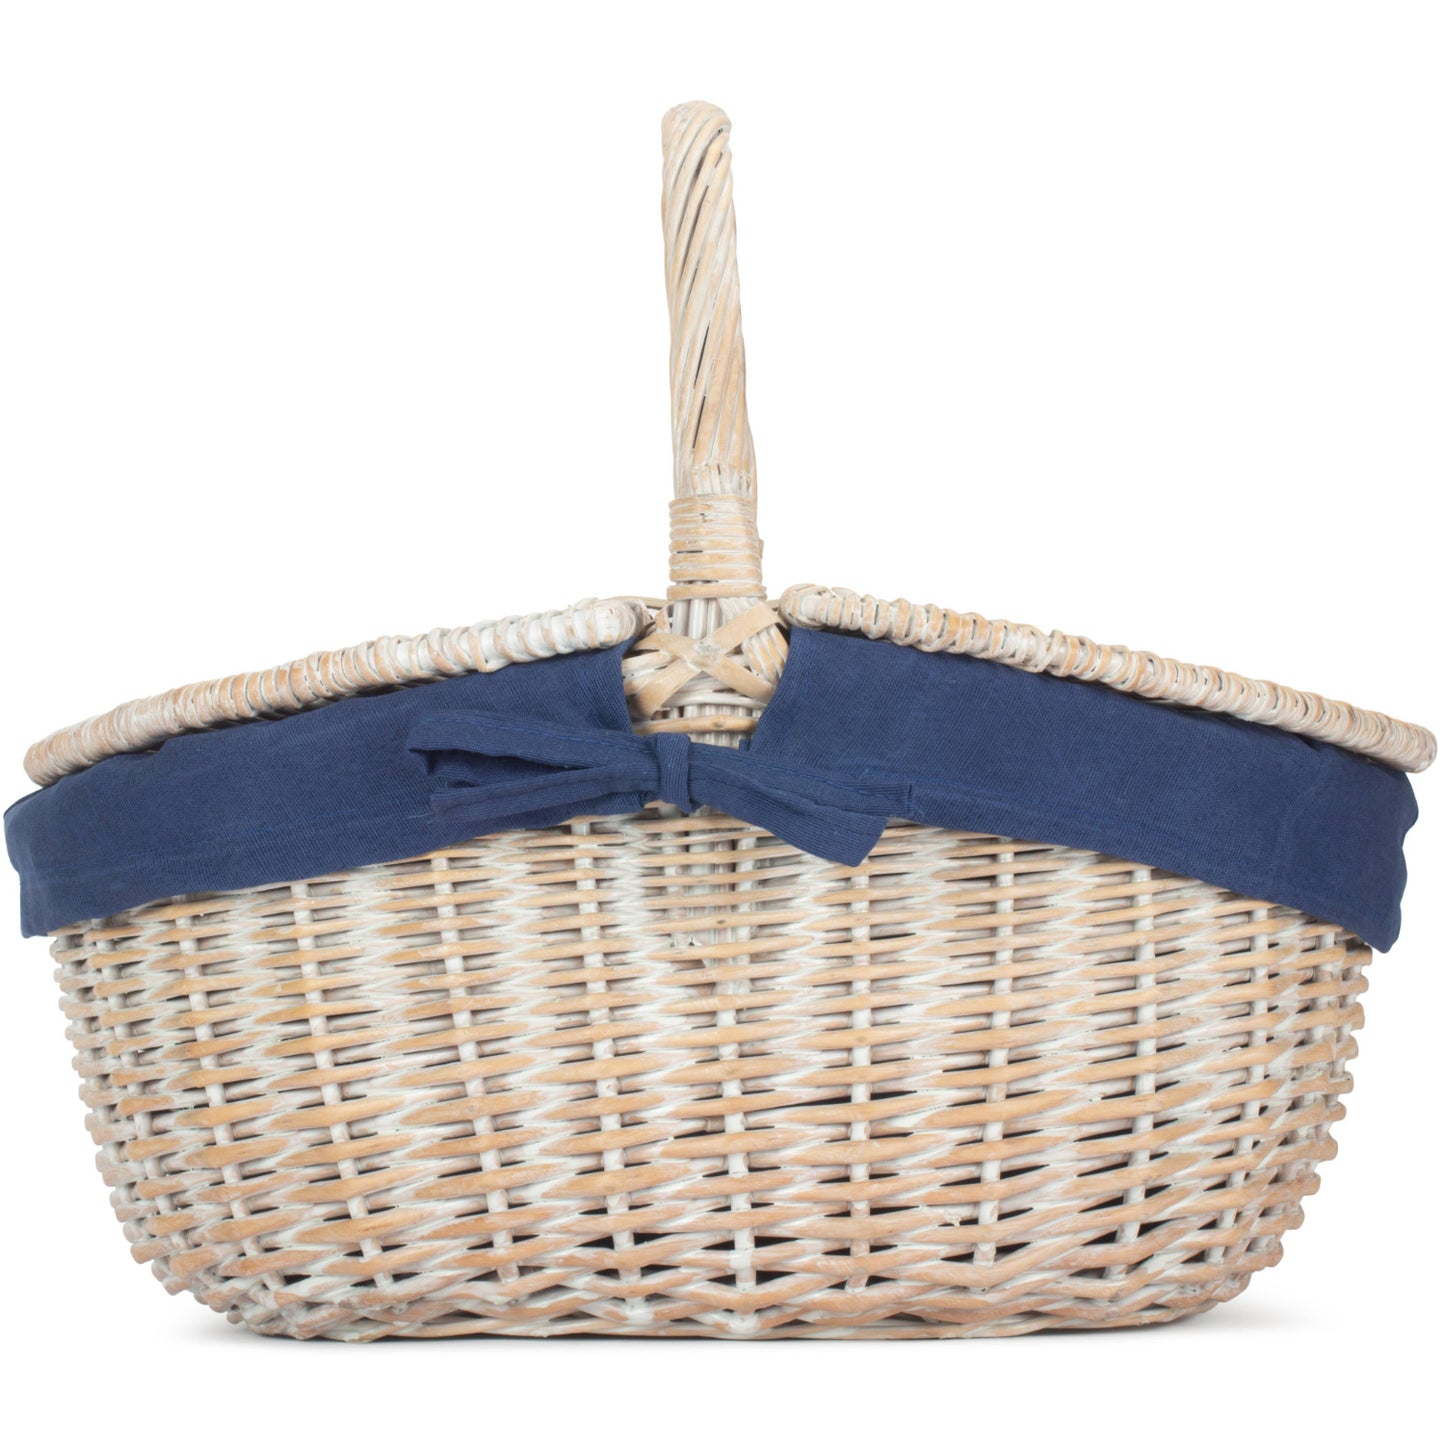 White Wash Finish Oval Picnic With Navy Blue Lining